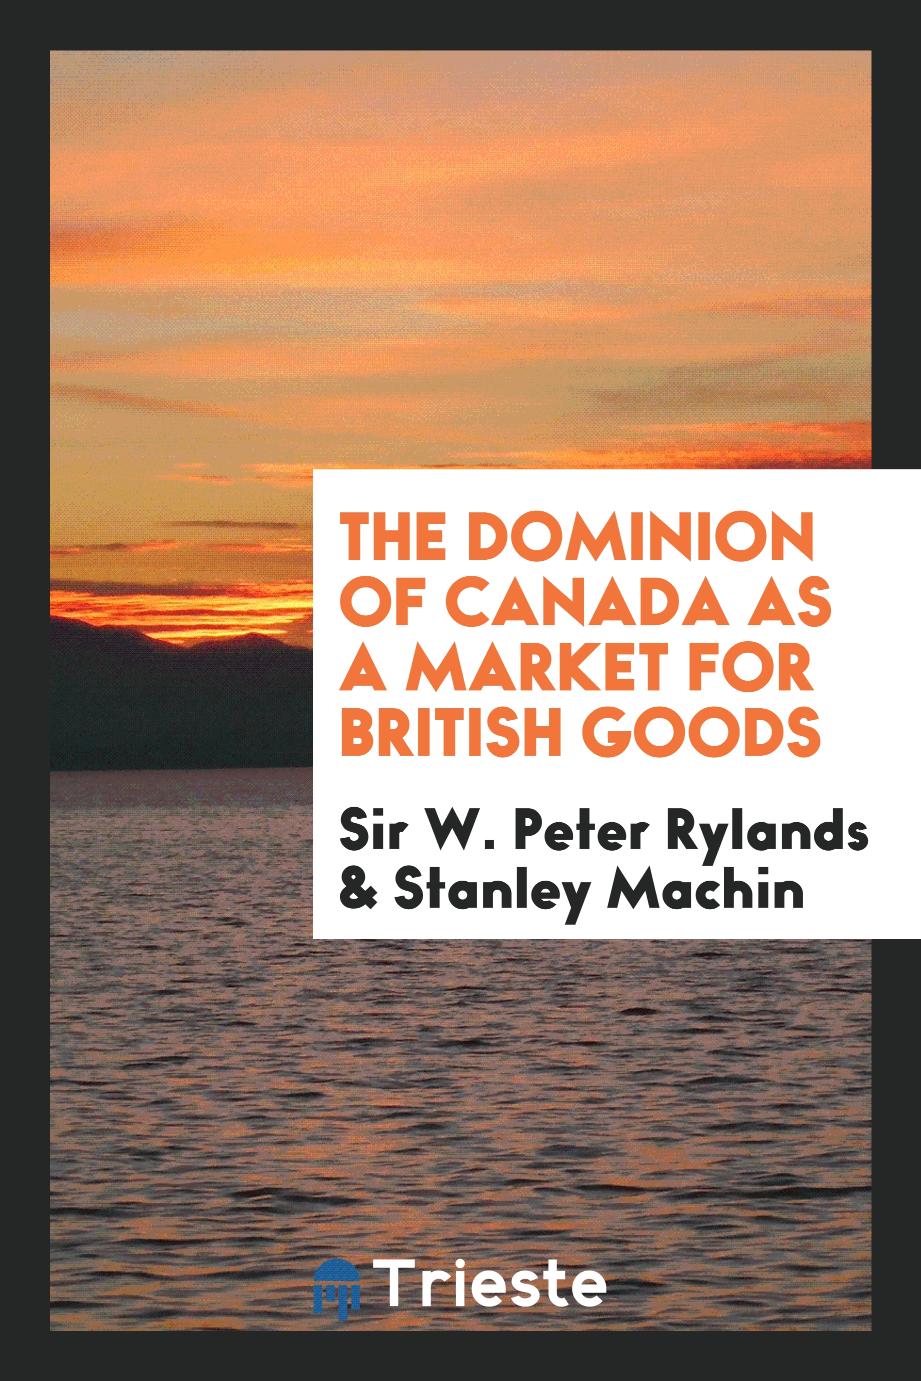 The Dominion of Canada as a market for British goods